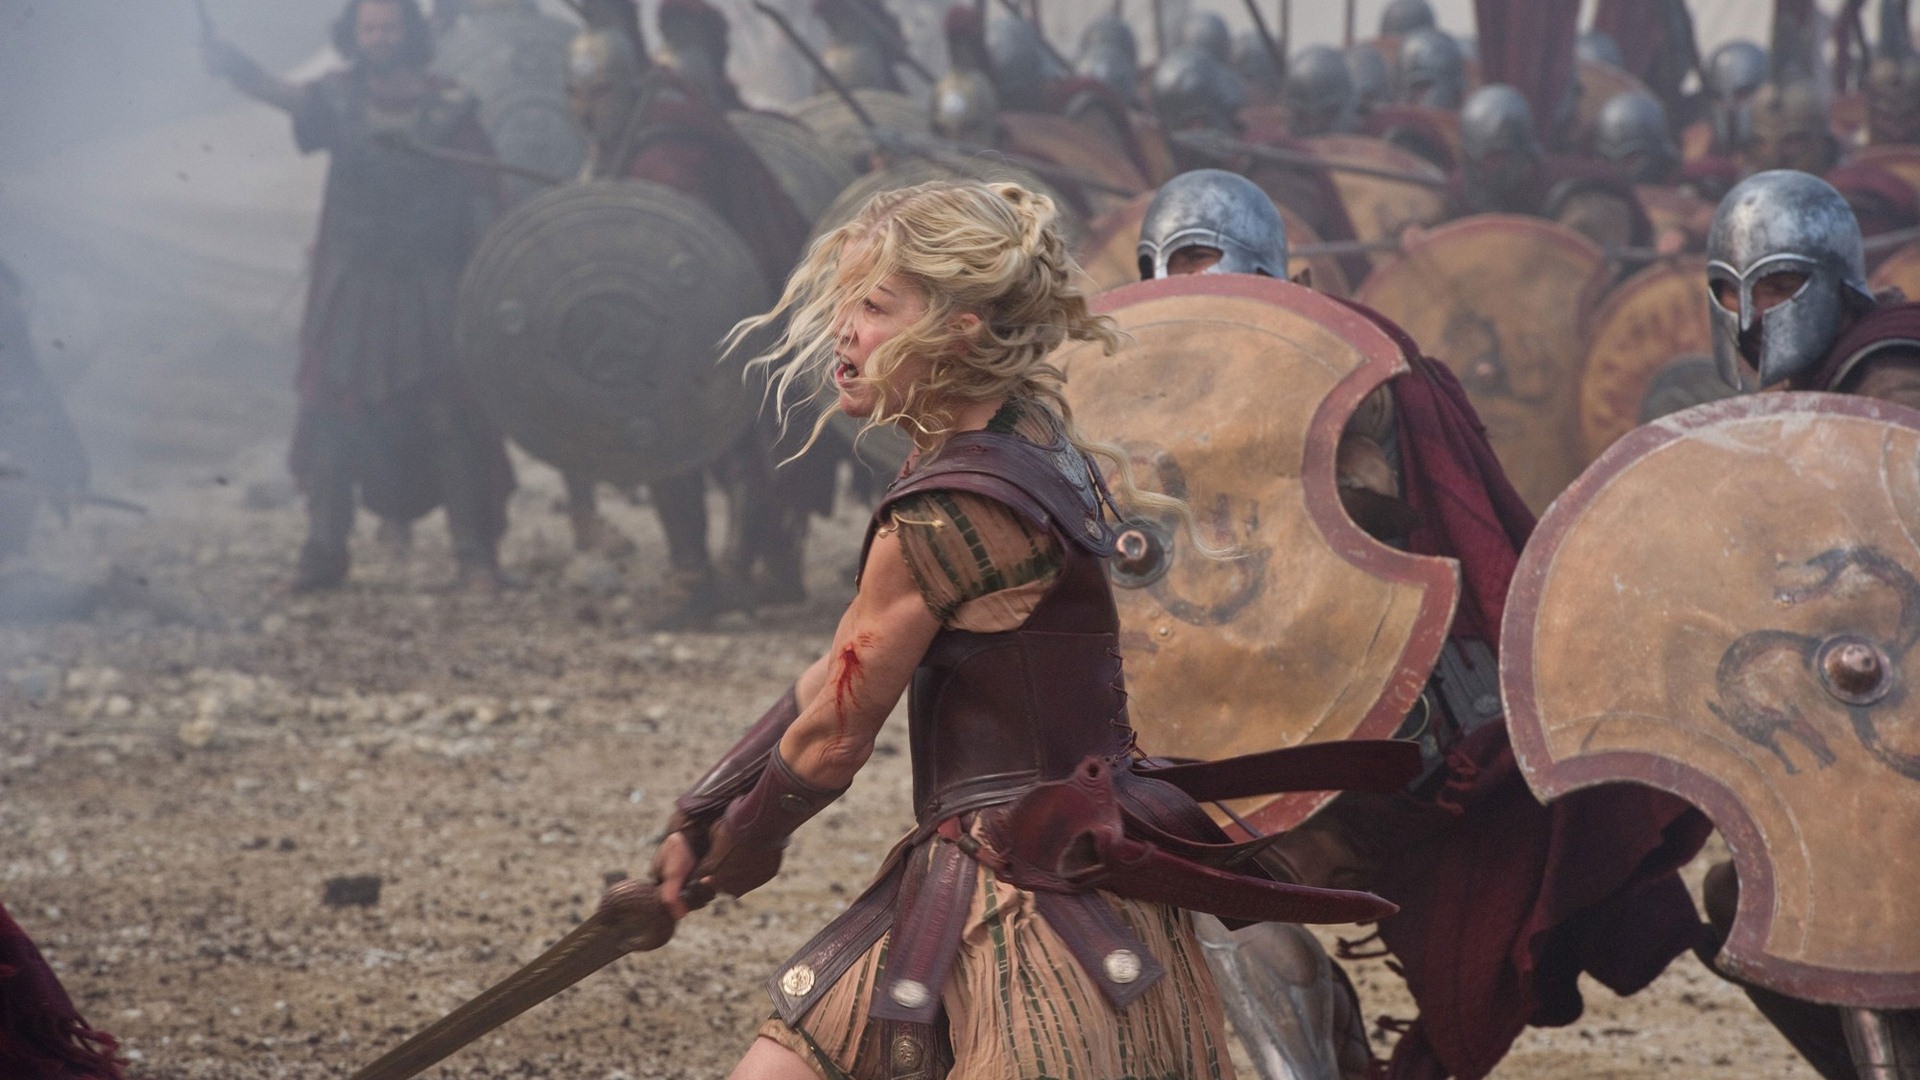 Wrath of the Titans HD Wallpapers #8 - 1920x1080